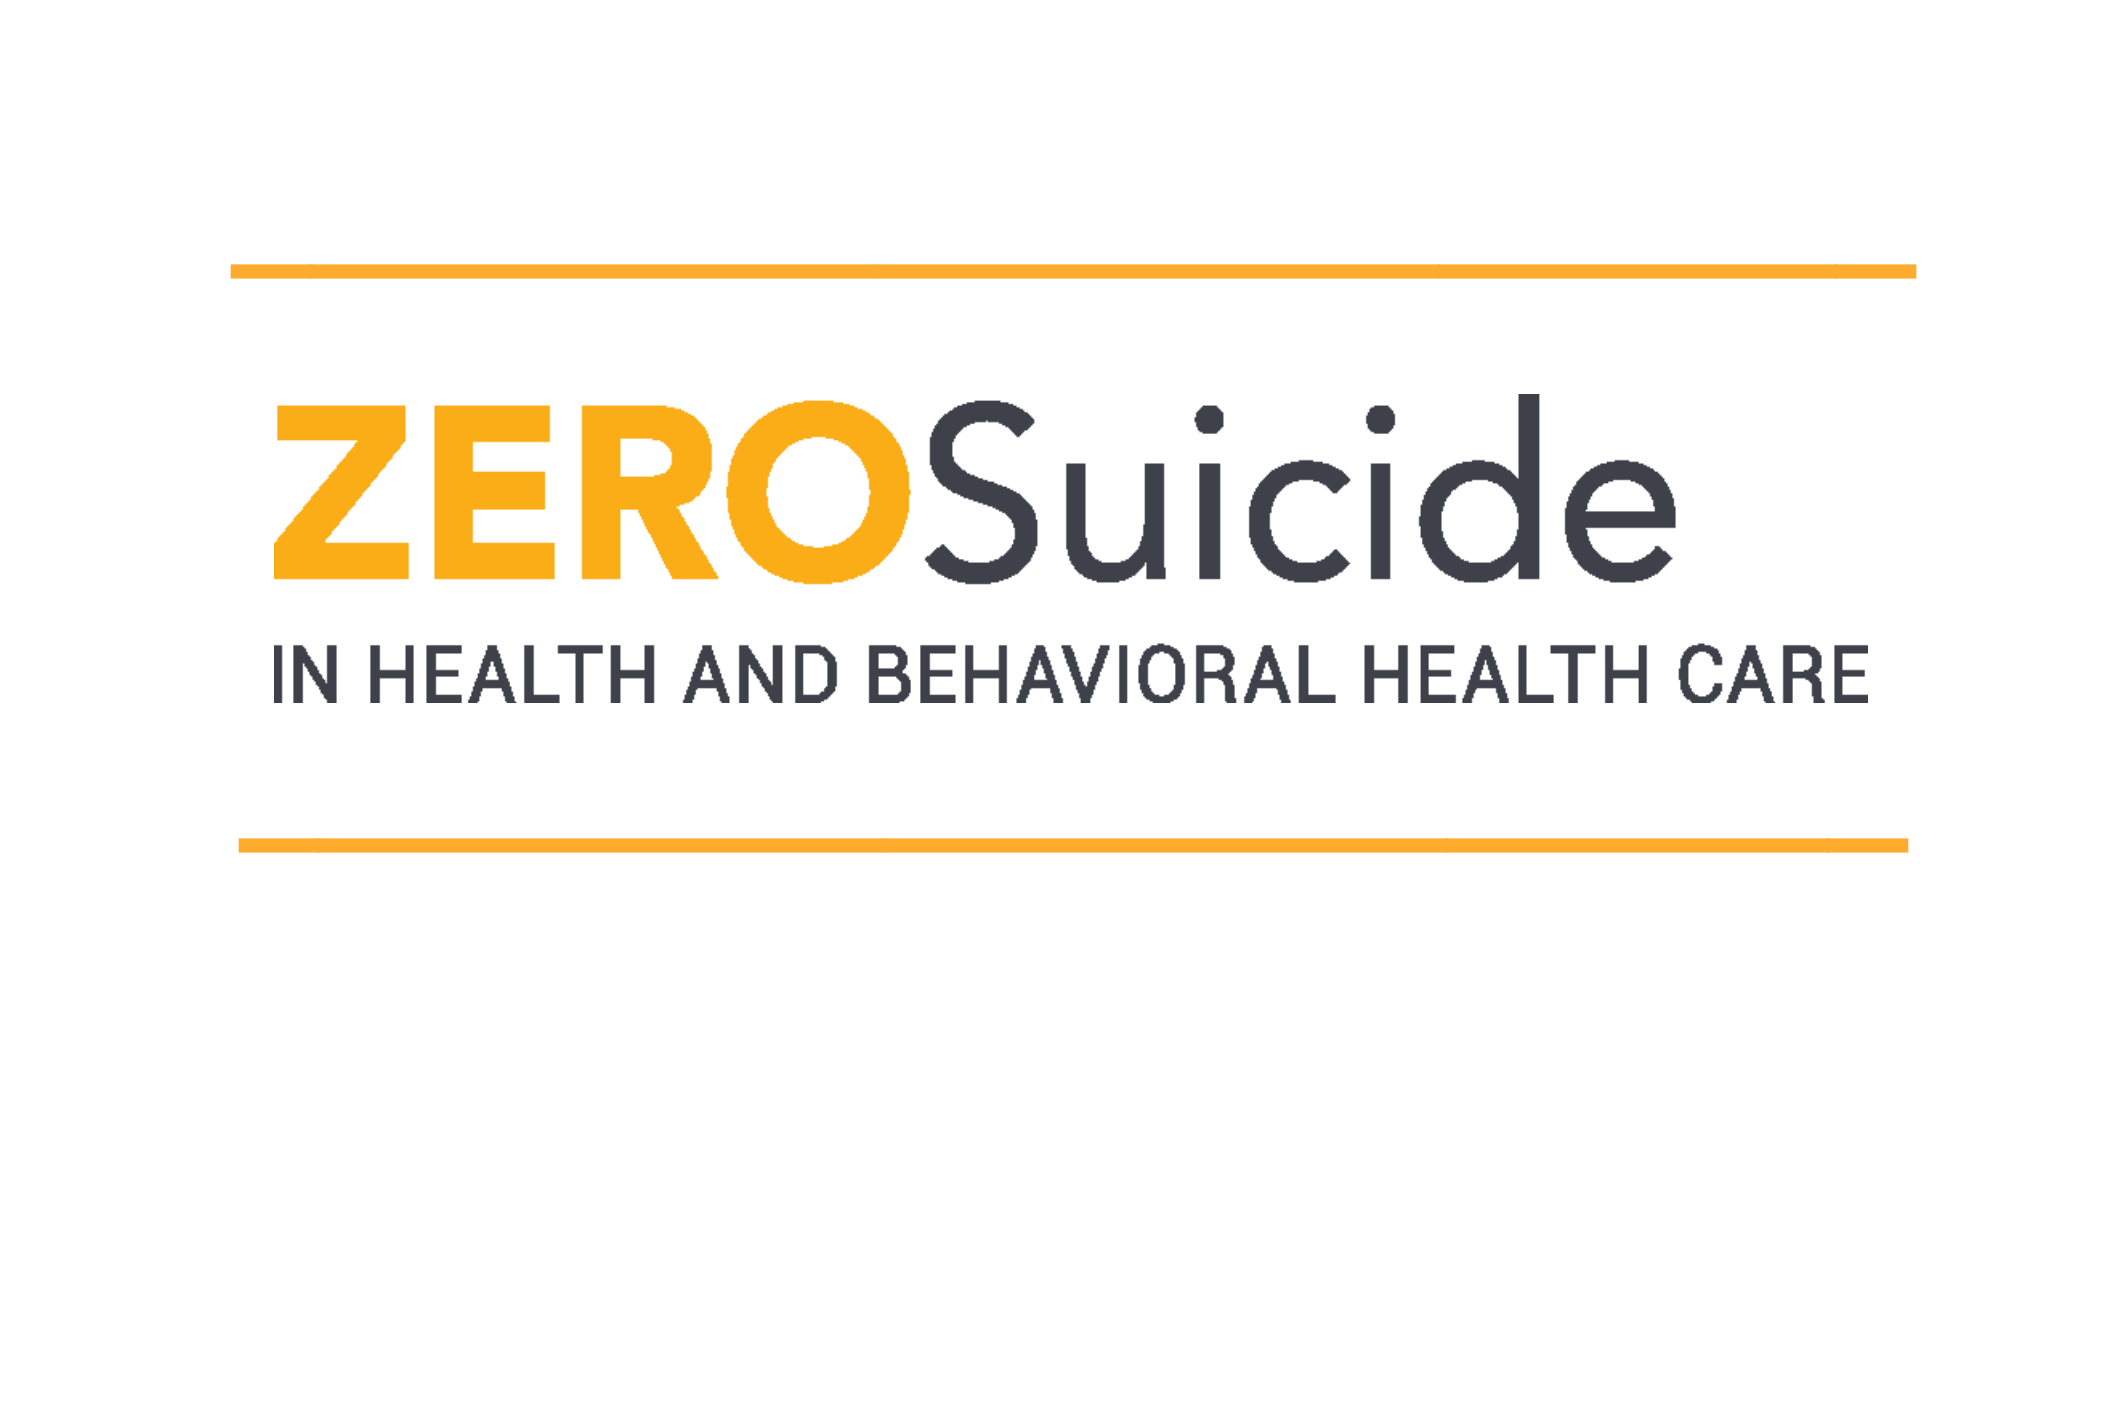 Implementing Zero Suicide in Health Care